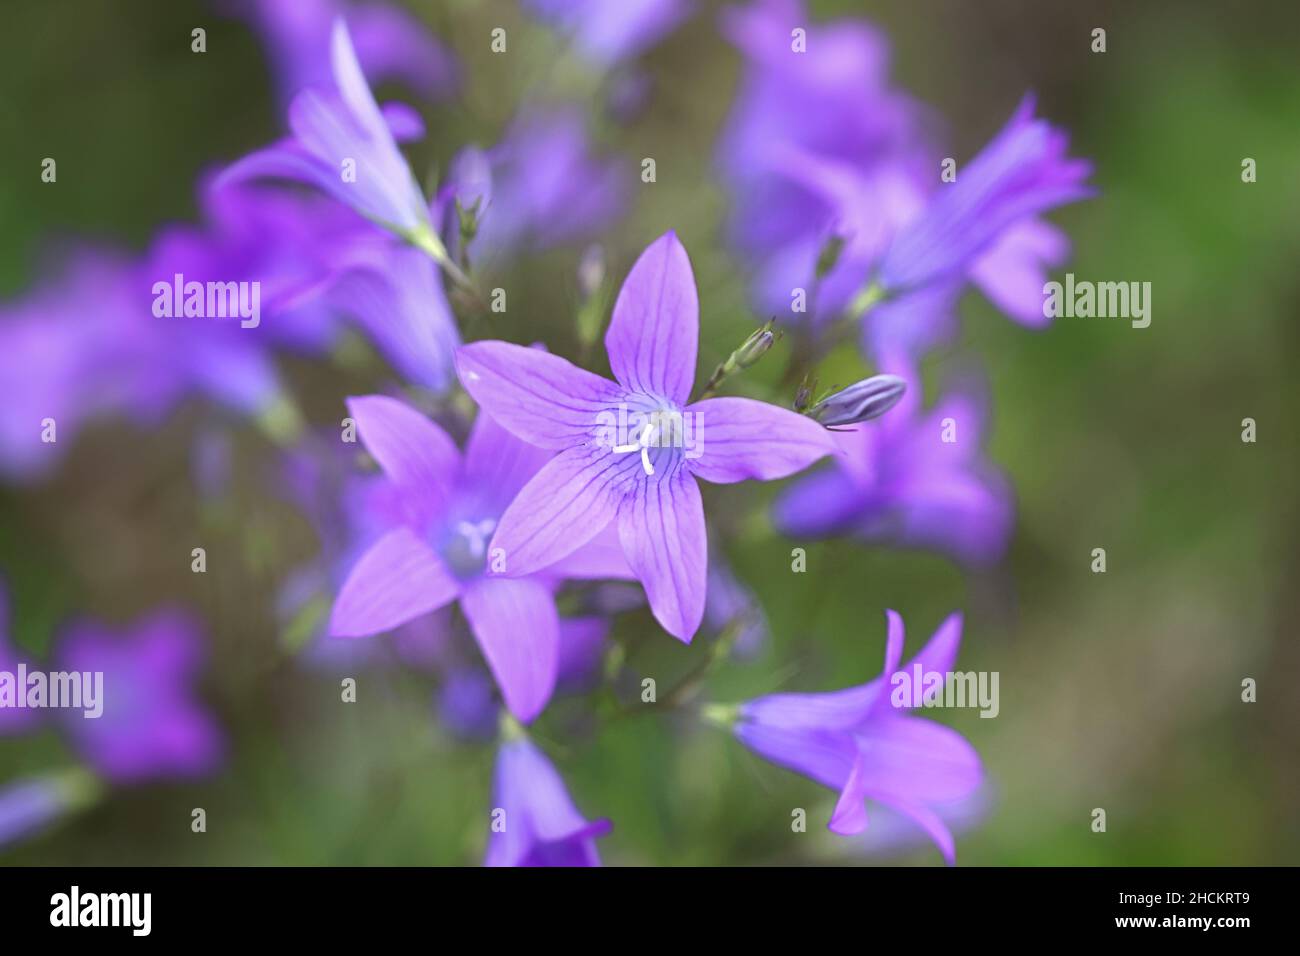 Campanula patula, known as Spreading Bellflower, wild flower from Finland Stock Photo